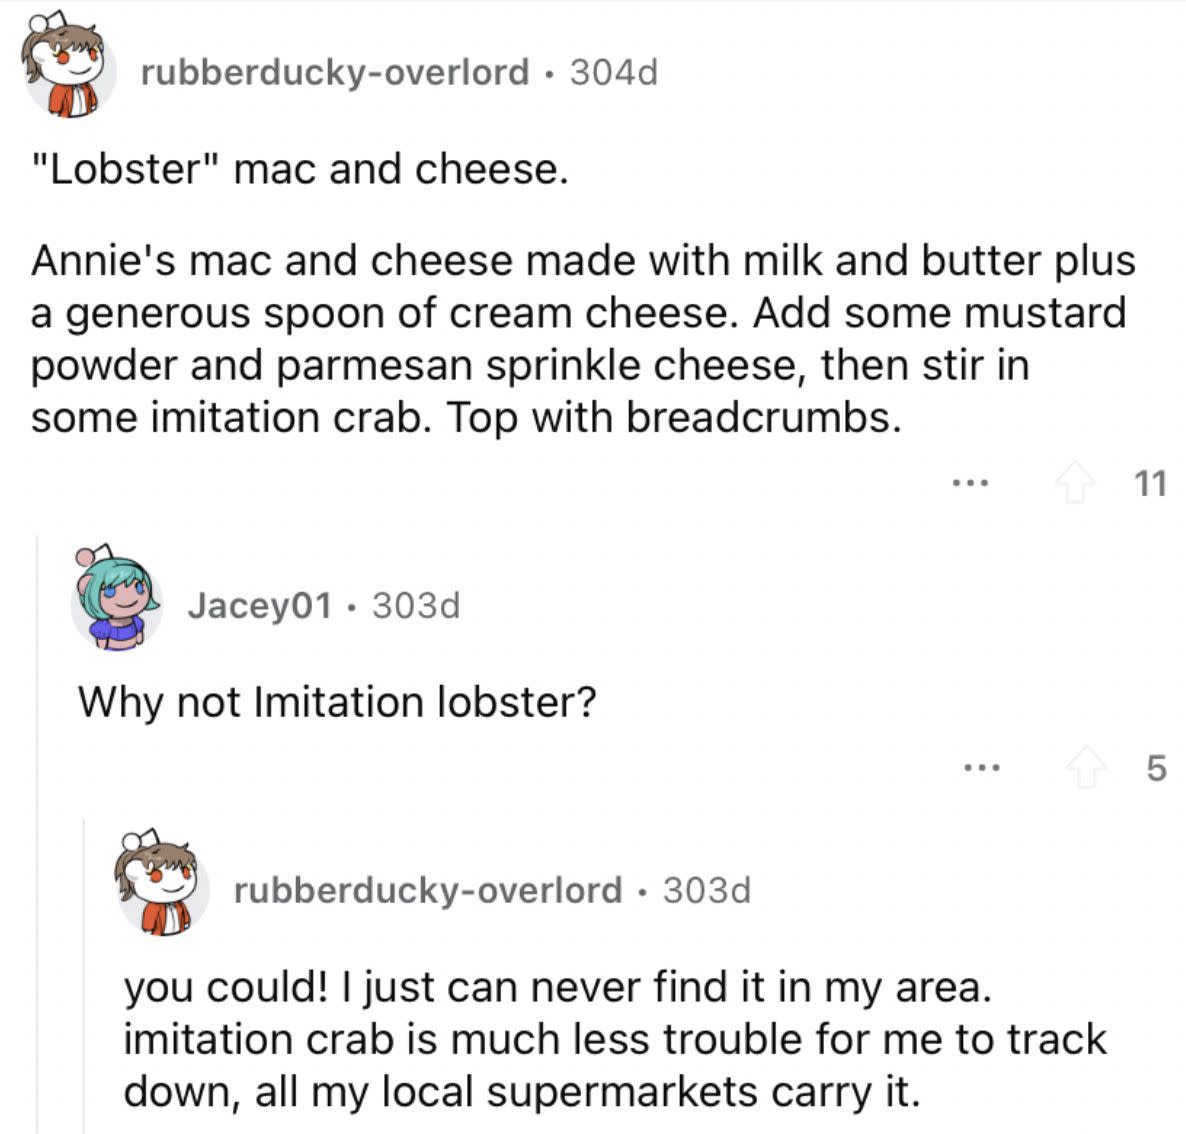 Reddit screenshot about cheap homemade mac and cheese.